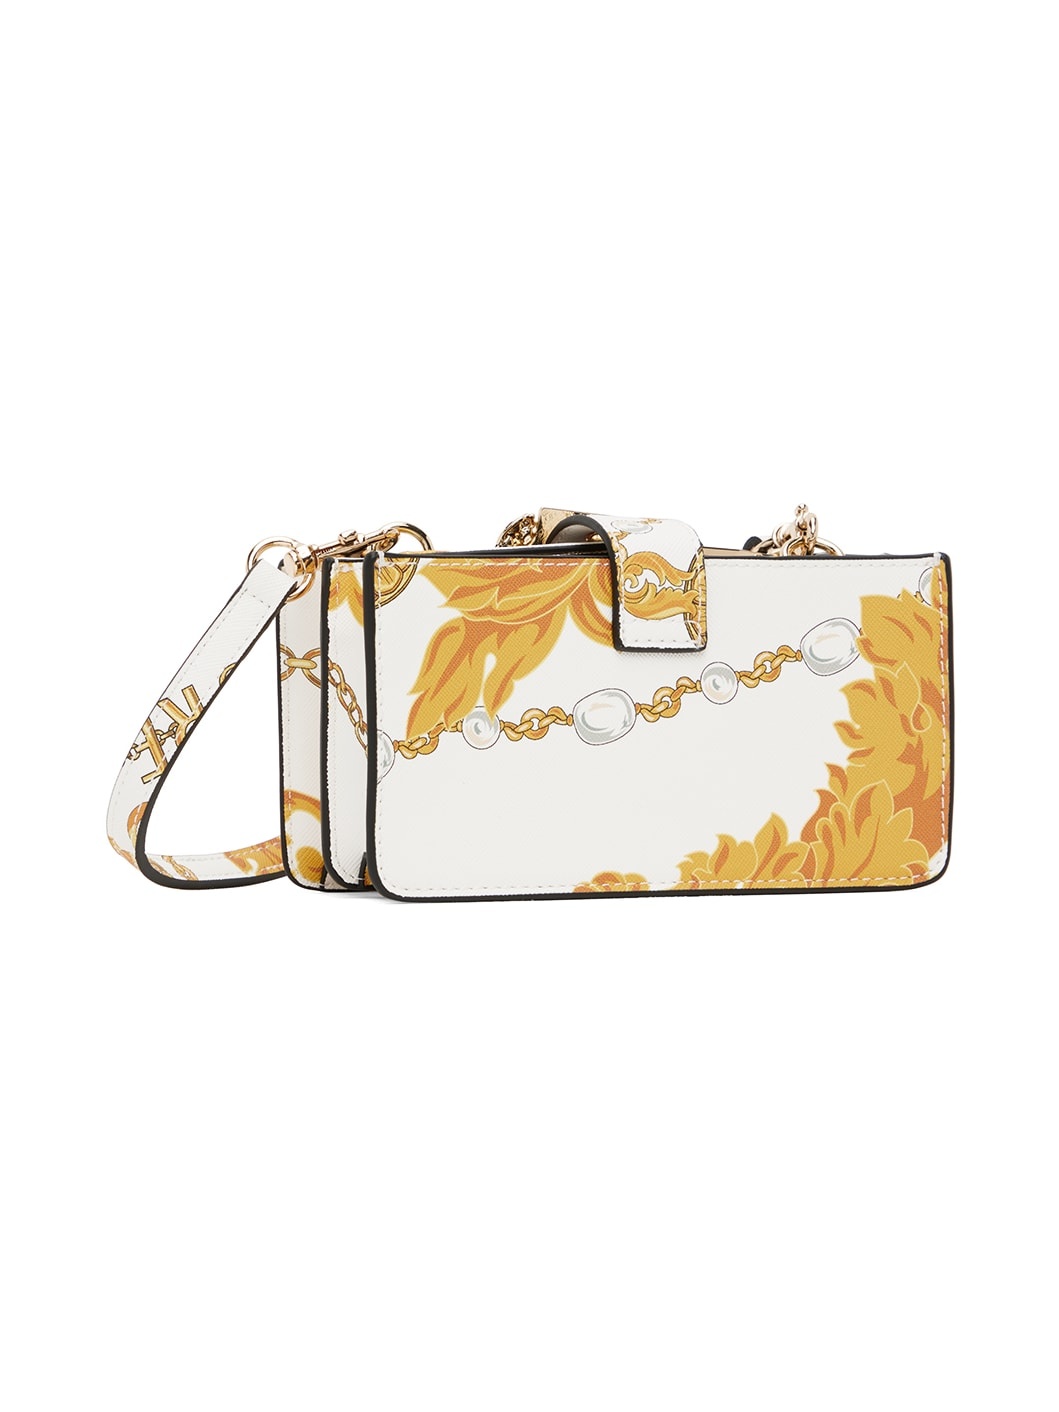 White & Gold Pin-Buckle Bag - 3